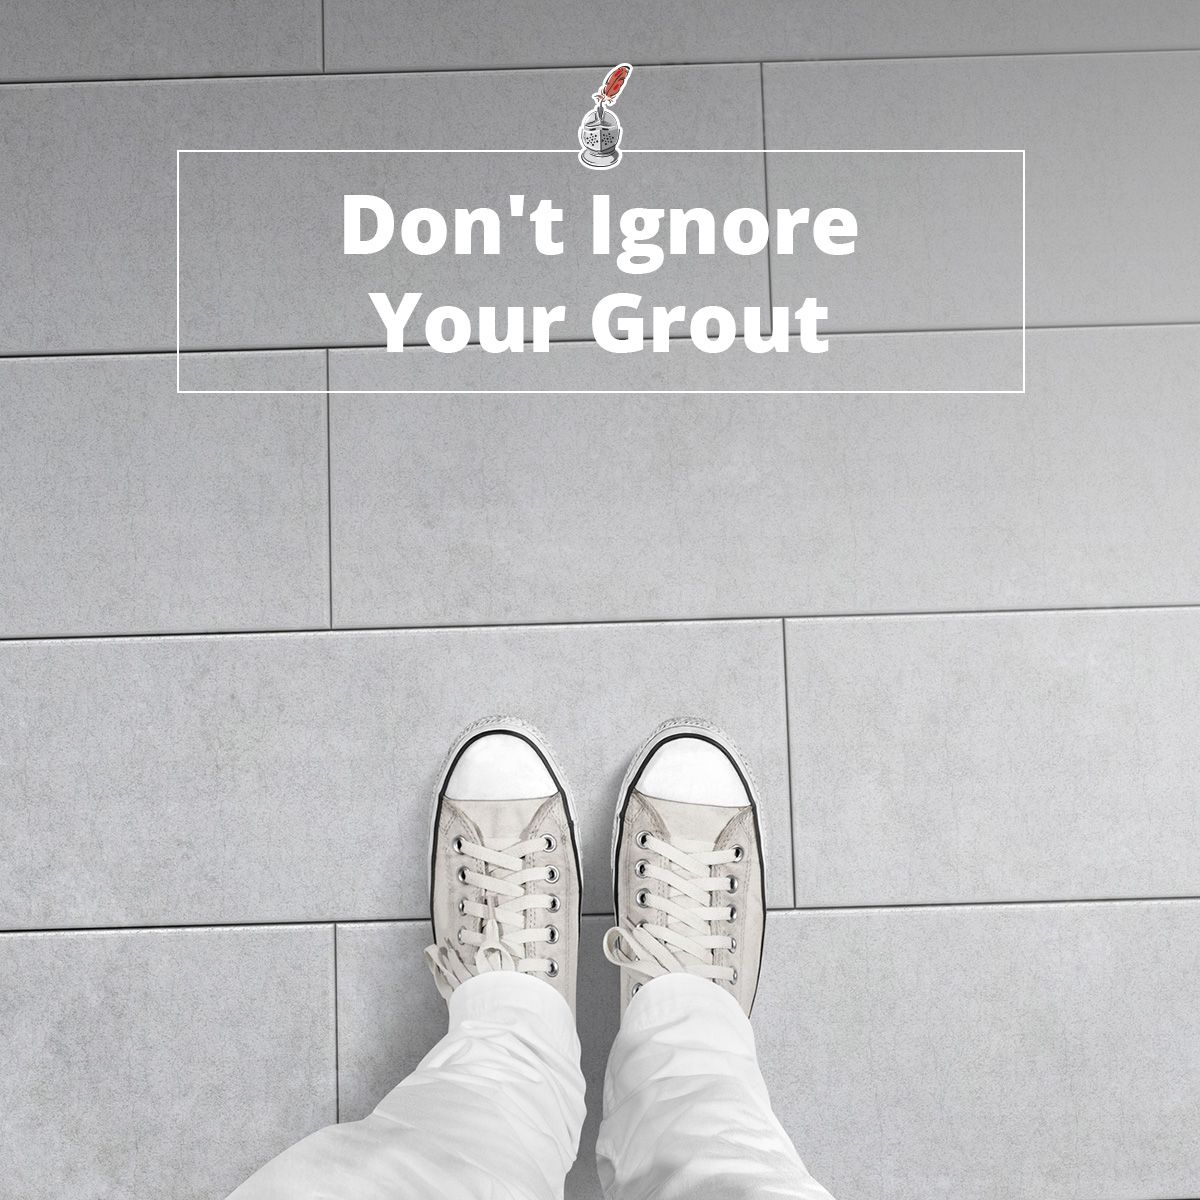 Don't Ignore Your Grout